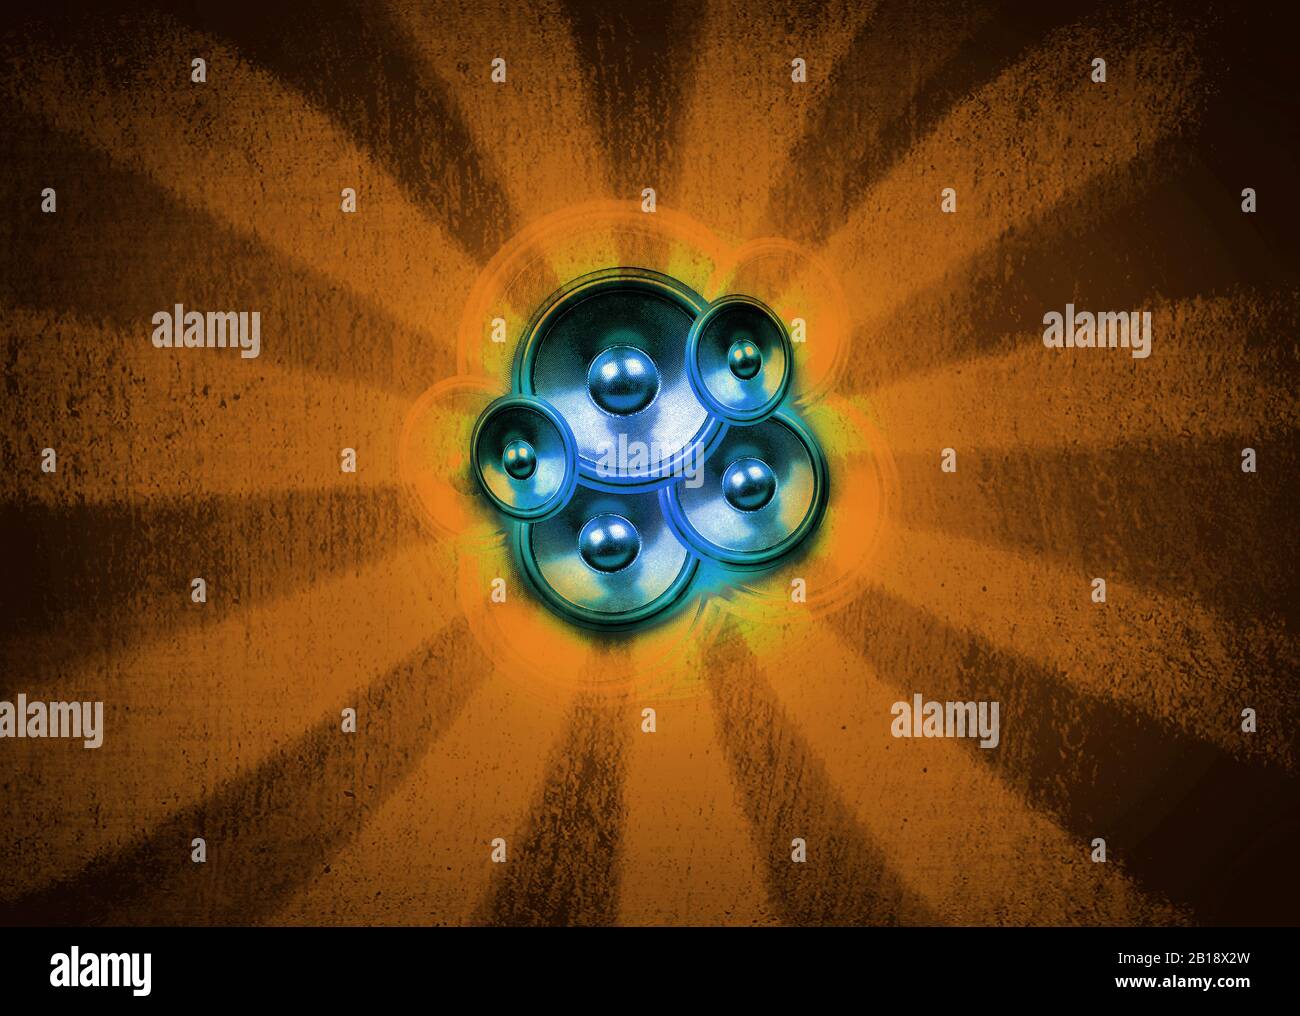 Blue audio speakers on a yellow sunburst background with vignette Stock Photo